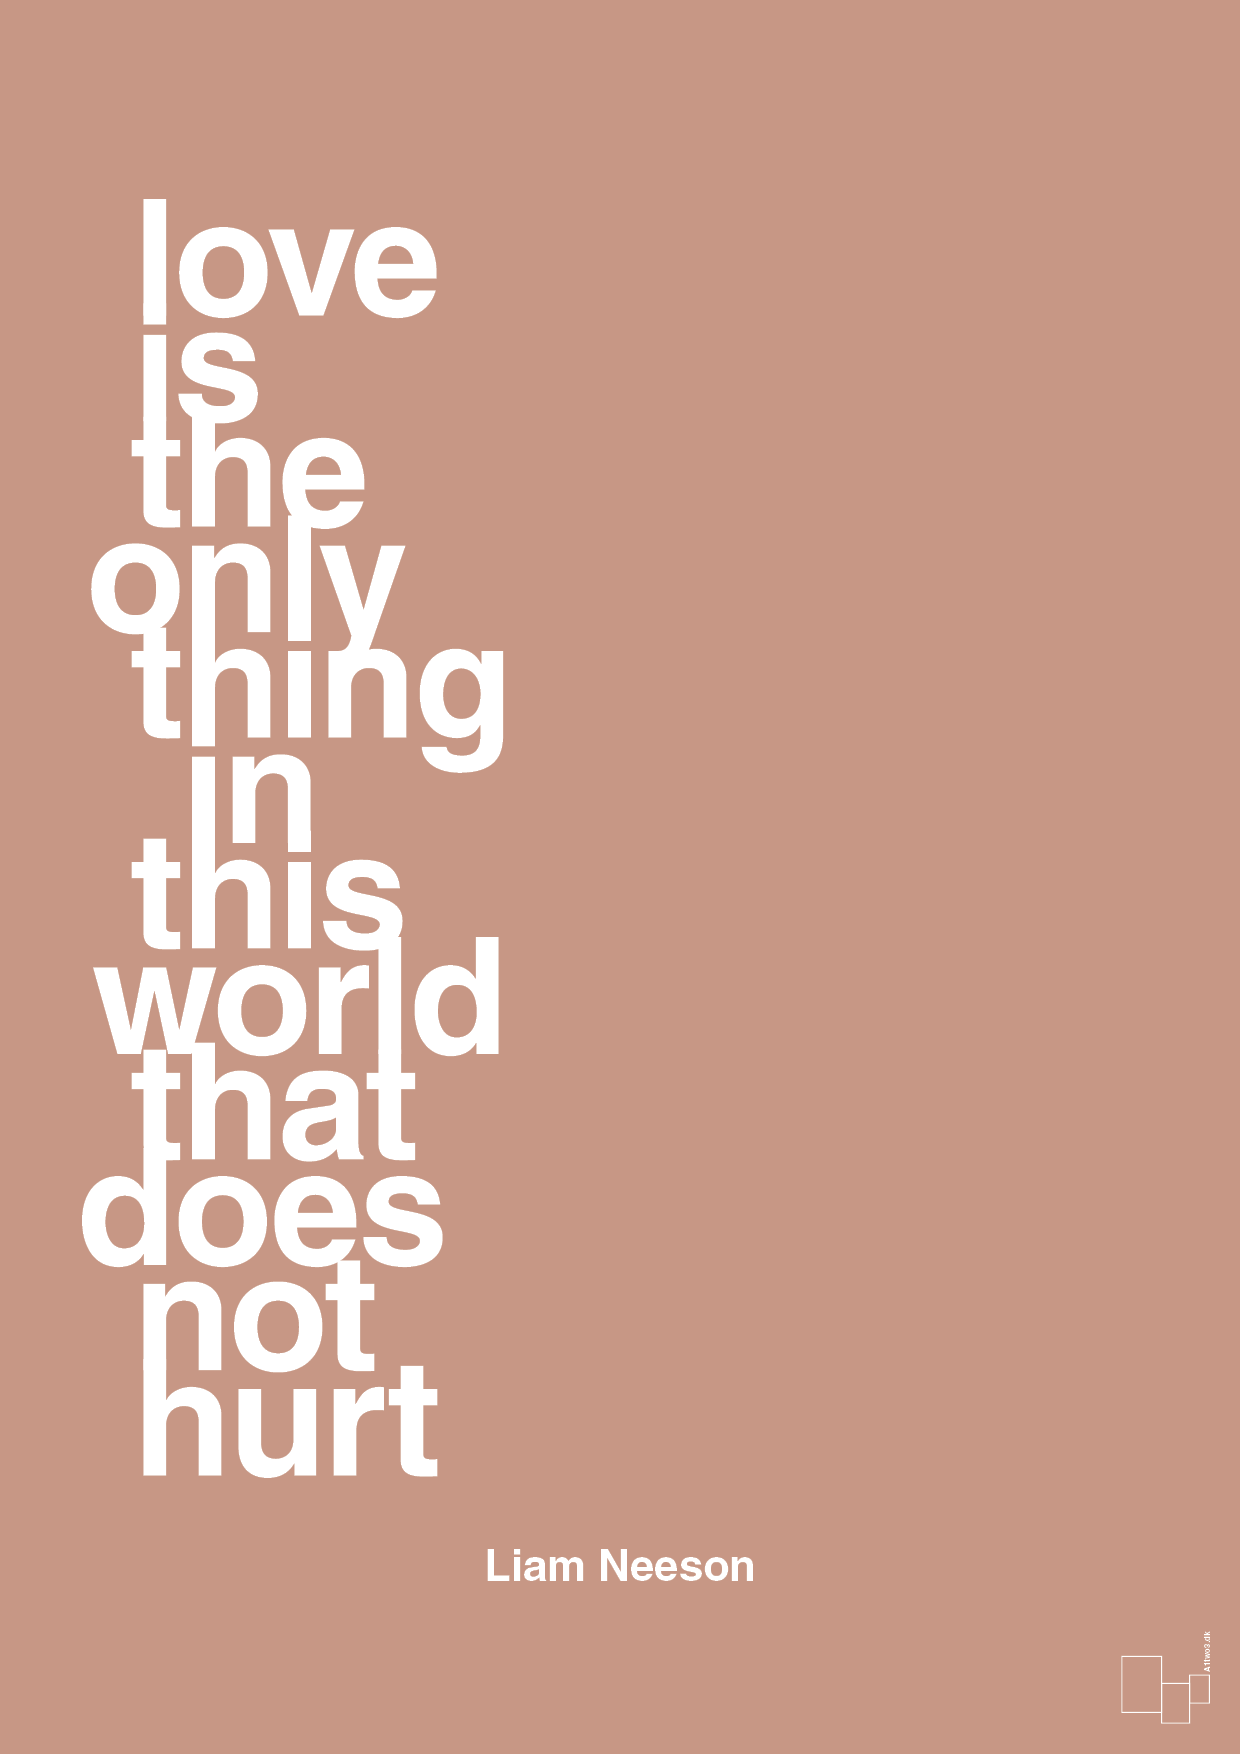 love is the only thing in this world that does not hurt - Plakat med Citater i Powder